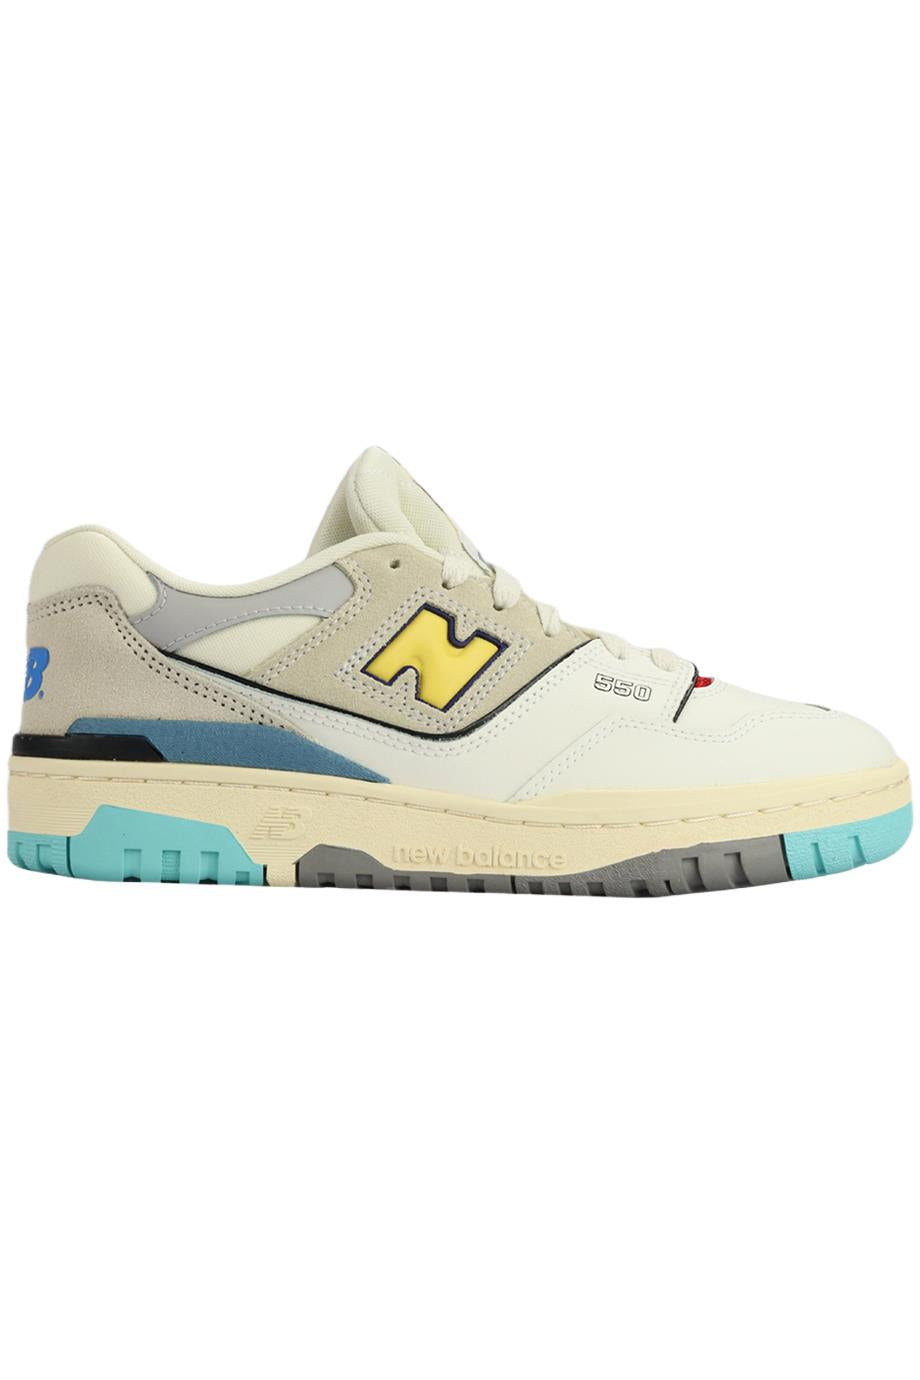 NEW BALANCE 550 SURF SUEDE AND LEATHER SNEAKERS EU 38.5 UK 5.5 US 6